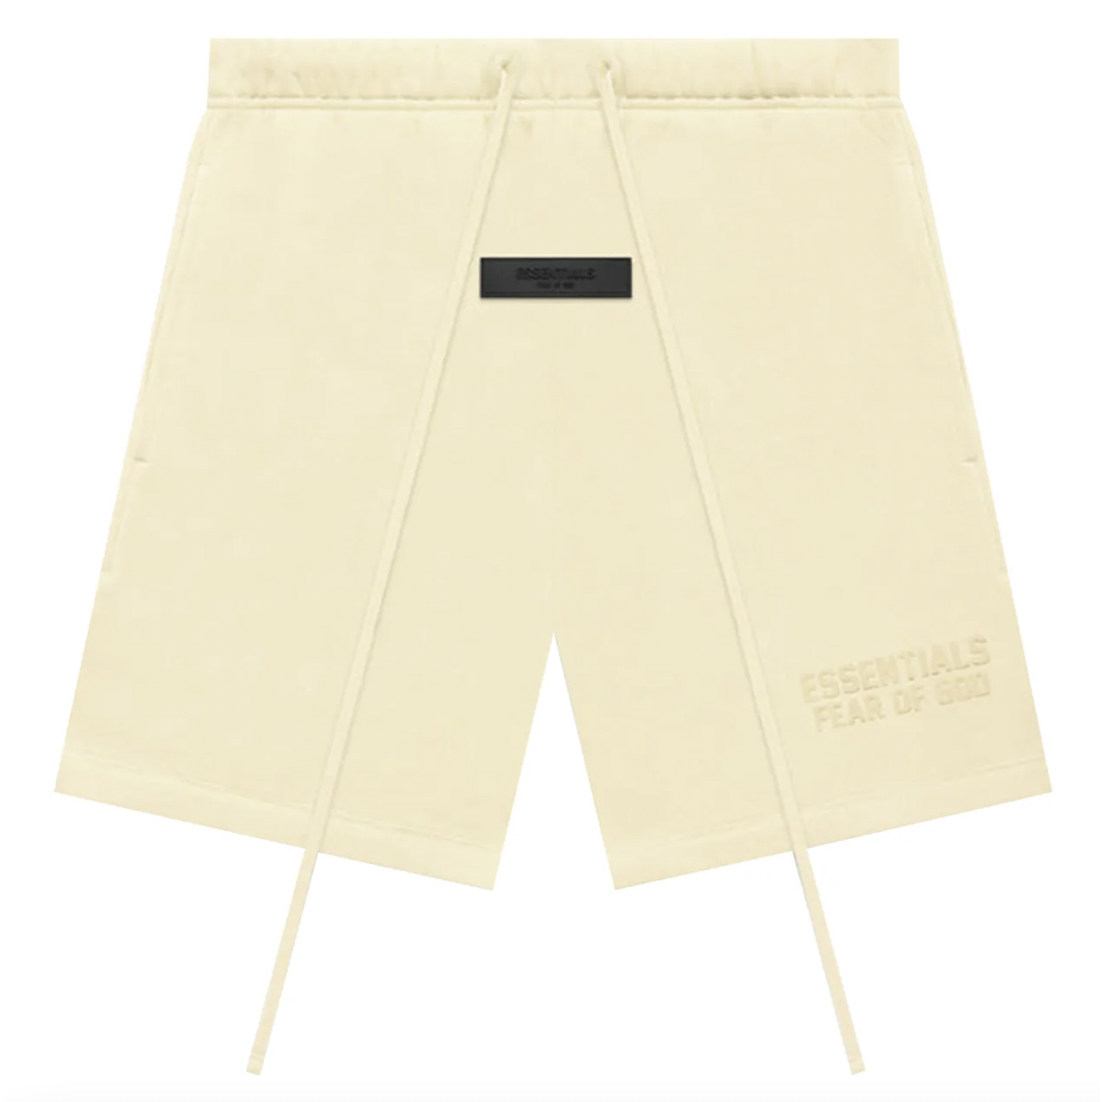 Fear of God Essentials Sweatshorts - Canary by Fear Of God from £75.00